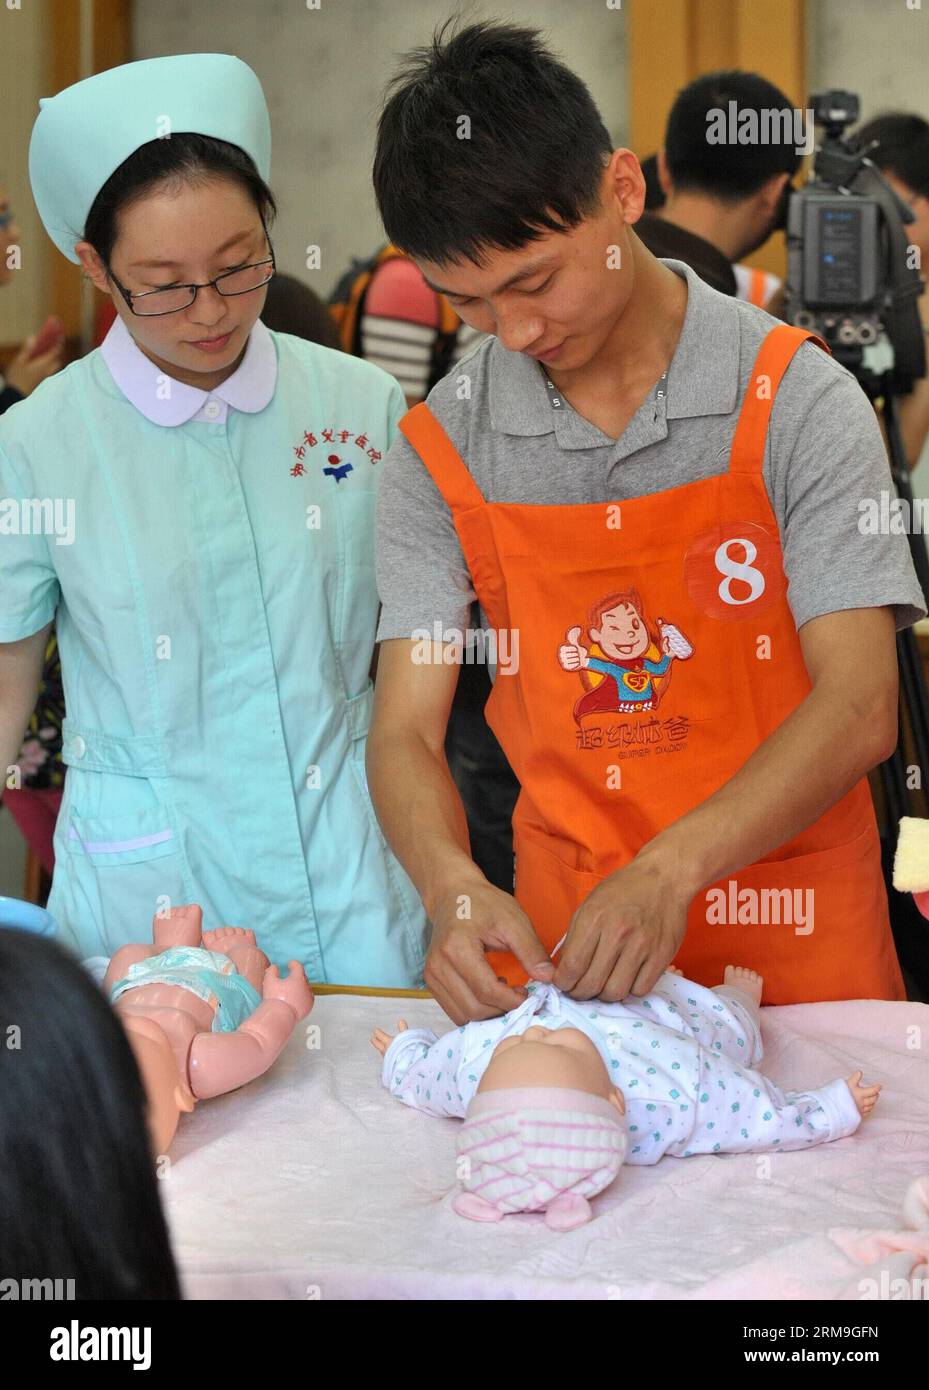 (140523) -- CHANGSHA, May 23, 2014 (Xinhua) -- A father learns dressing a baby at a Super Daddy Training Camp at Hunan Provincial Children Hospital in Changsha, capital of central China s Hunan Province, May 23, 2014. A total of 40 daddies took part in the camp and they would learn baby nurturing skills in a short time under the guidance of paediatricians. (Xinhua/Long Hongtao) (lfj) CHINA-HUNAN-CHANGSHA-SUPER DADAY TRAINING CAMP (CN) PUBLICATIONxNOTxINxCHN   Changsha May 23 2014 XINHUA a Father learns Dressing a Baby AT a Super Daddy Training Camp AT Hunan Provincial Children Hospital in Chan Stock Photo